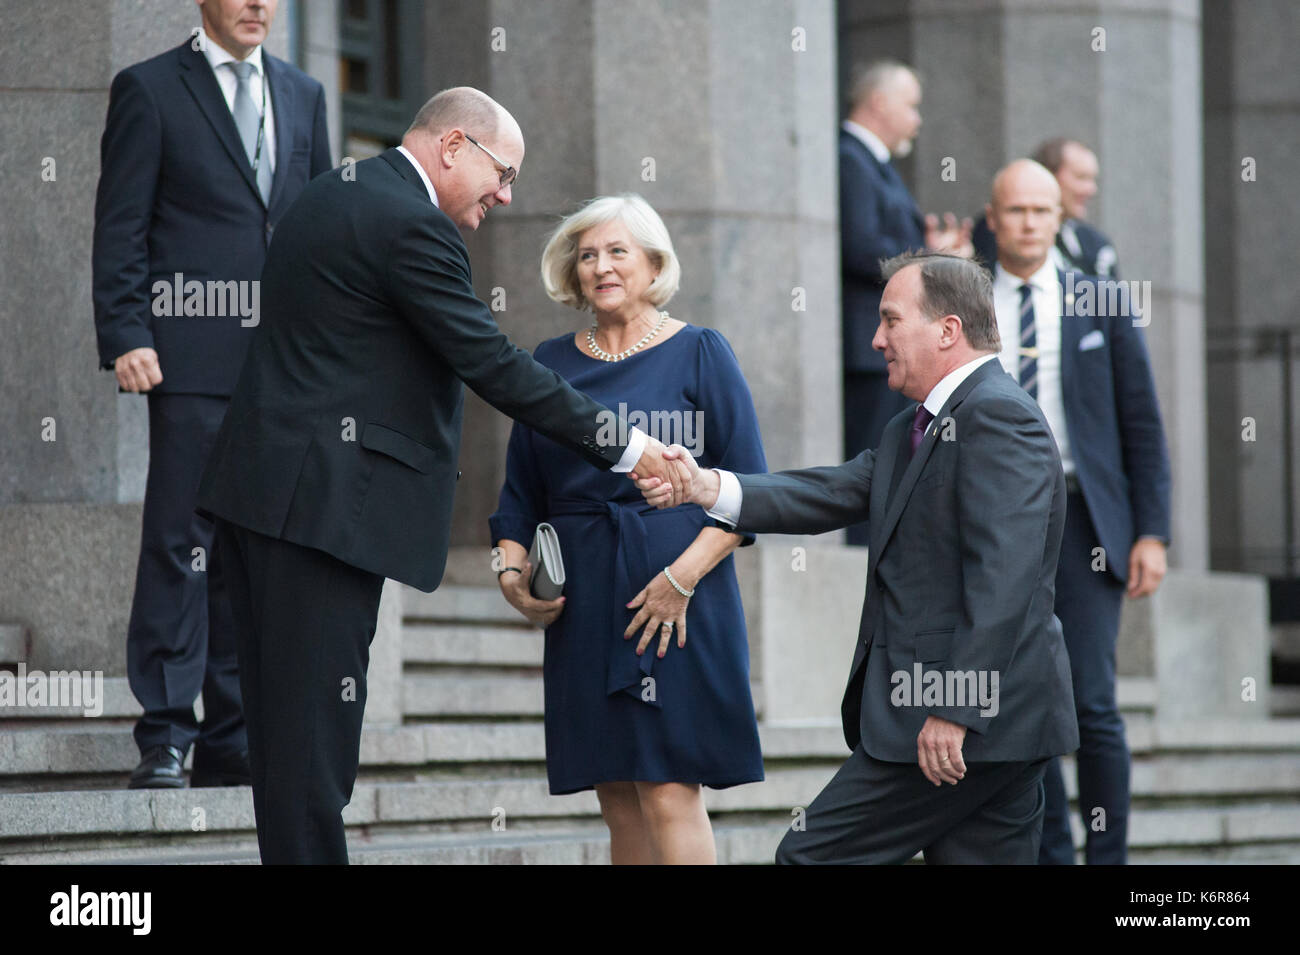 Stockholm, Sweden, 12th September, 2017. Opening of the Riksdag. Tonights concert at Stockholm Concert Hall, due to the opening of the Riksdag. First Speaker of the Riksdag Urban Ahlin, welcomes PM Stefan Lofven (S) and his wife Ulla Lofven.Credit: Barbro Bergfeldt/Alamy Live News Stock Photo